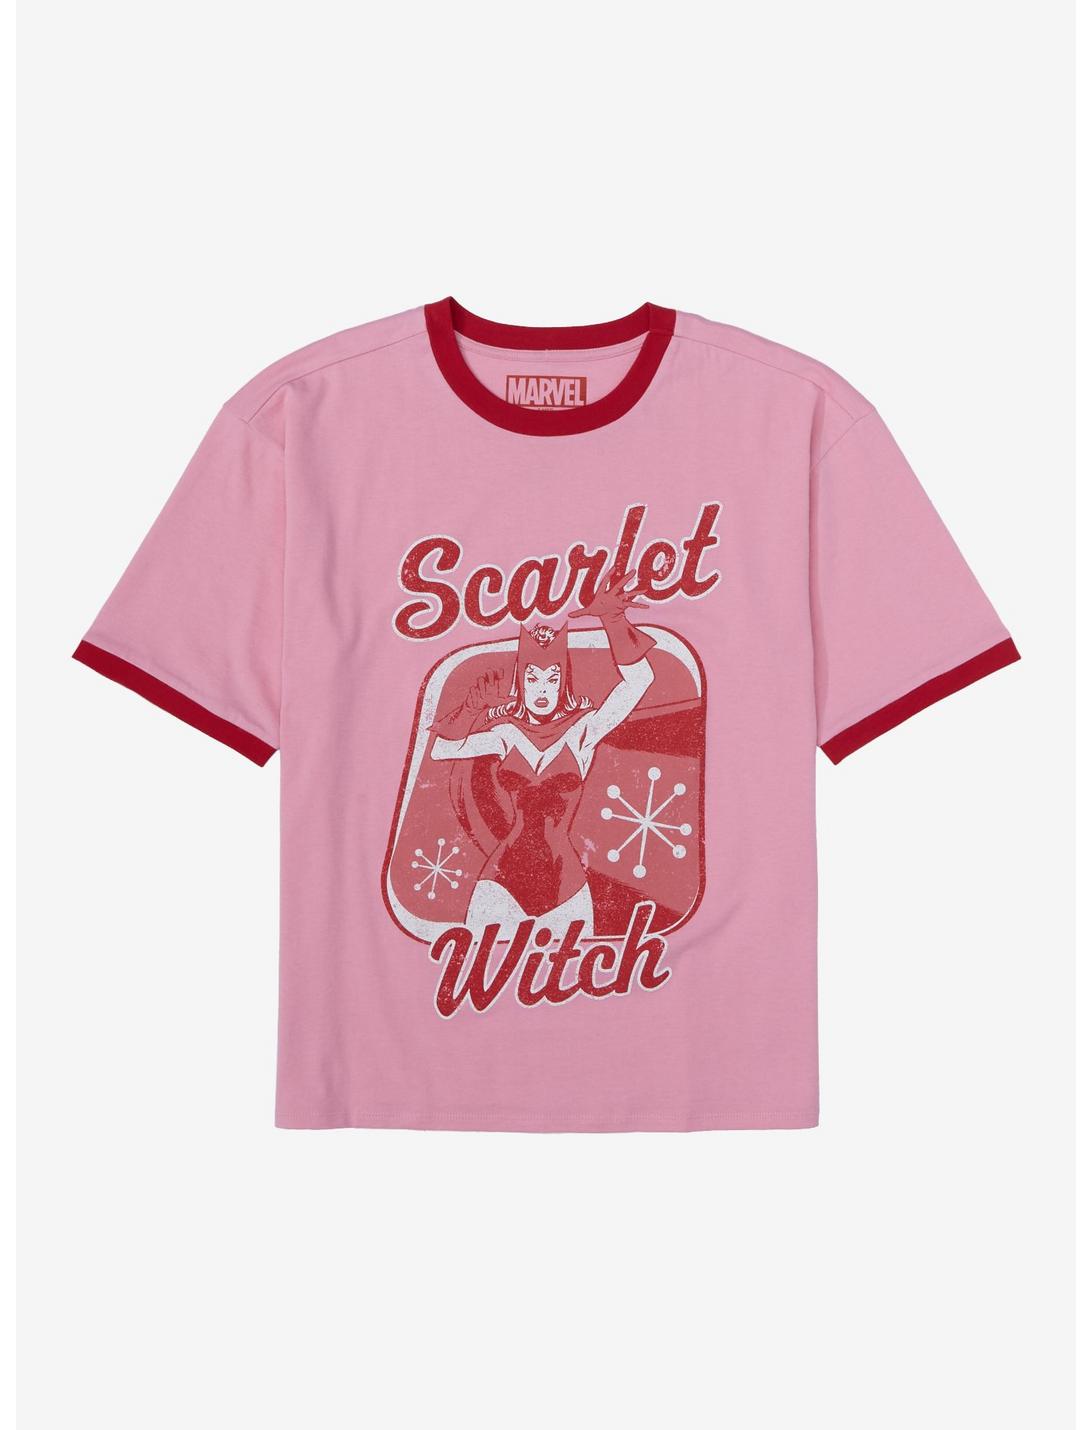 Marvel Scarlet Witch Retro Ringer T-Shirt - BoxLunch Exclusive, LIGHT PINK, hi-res